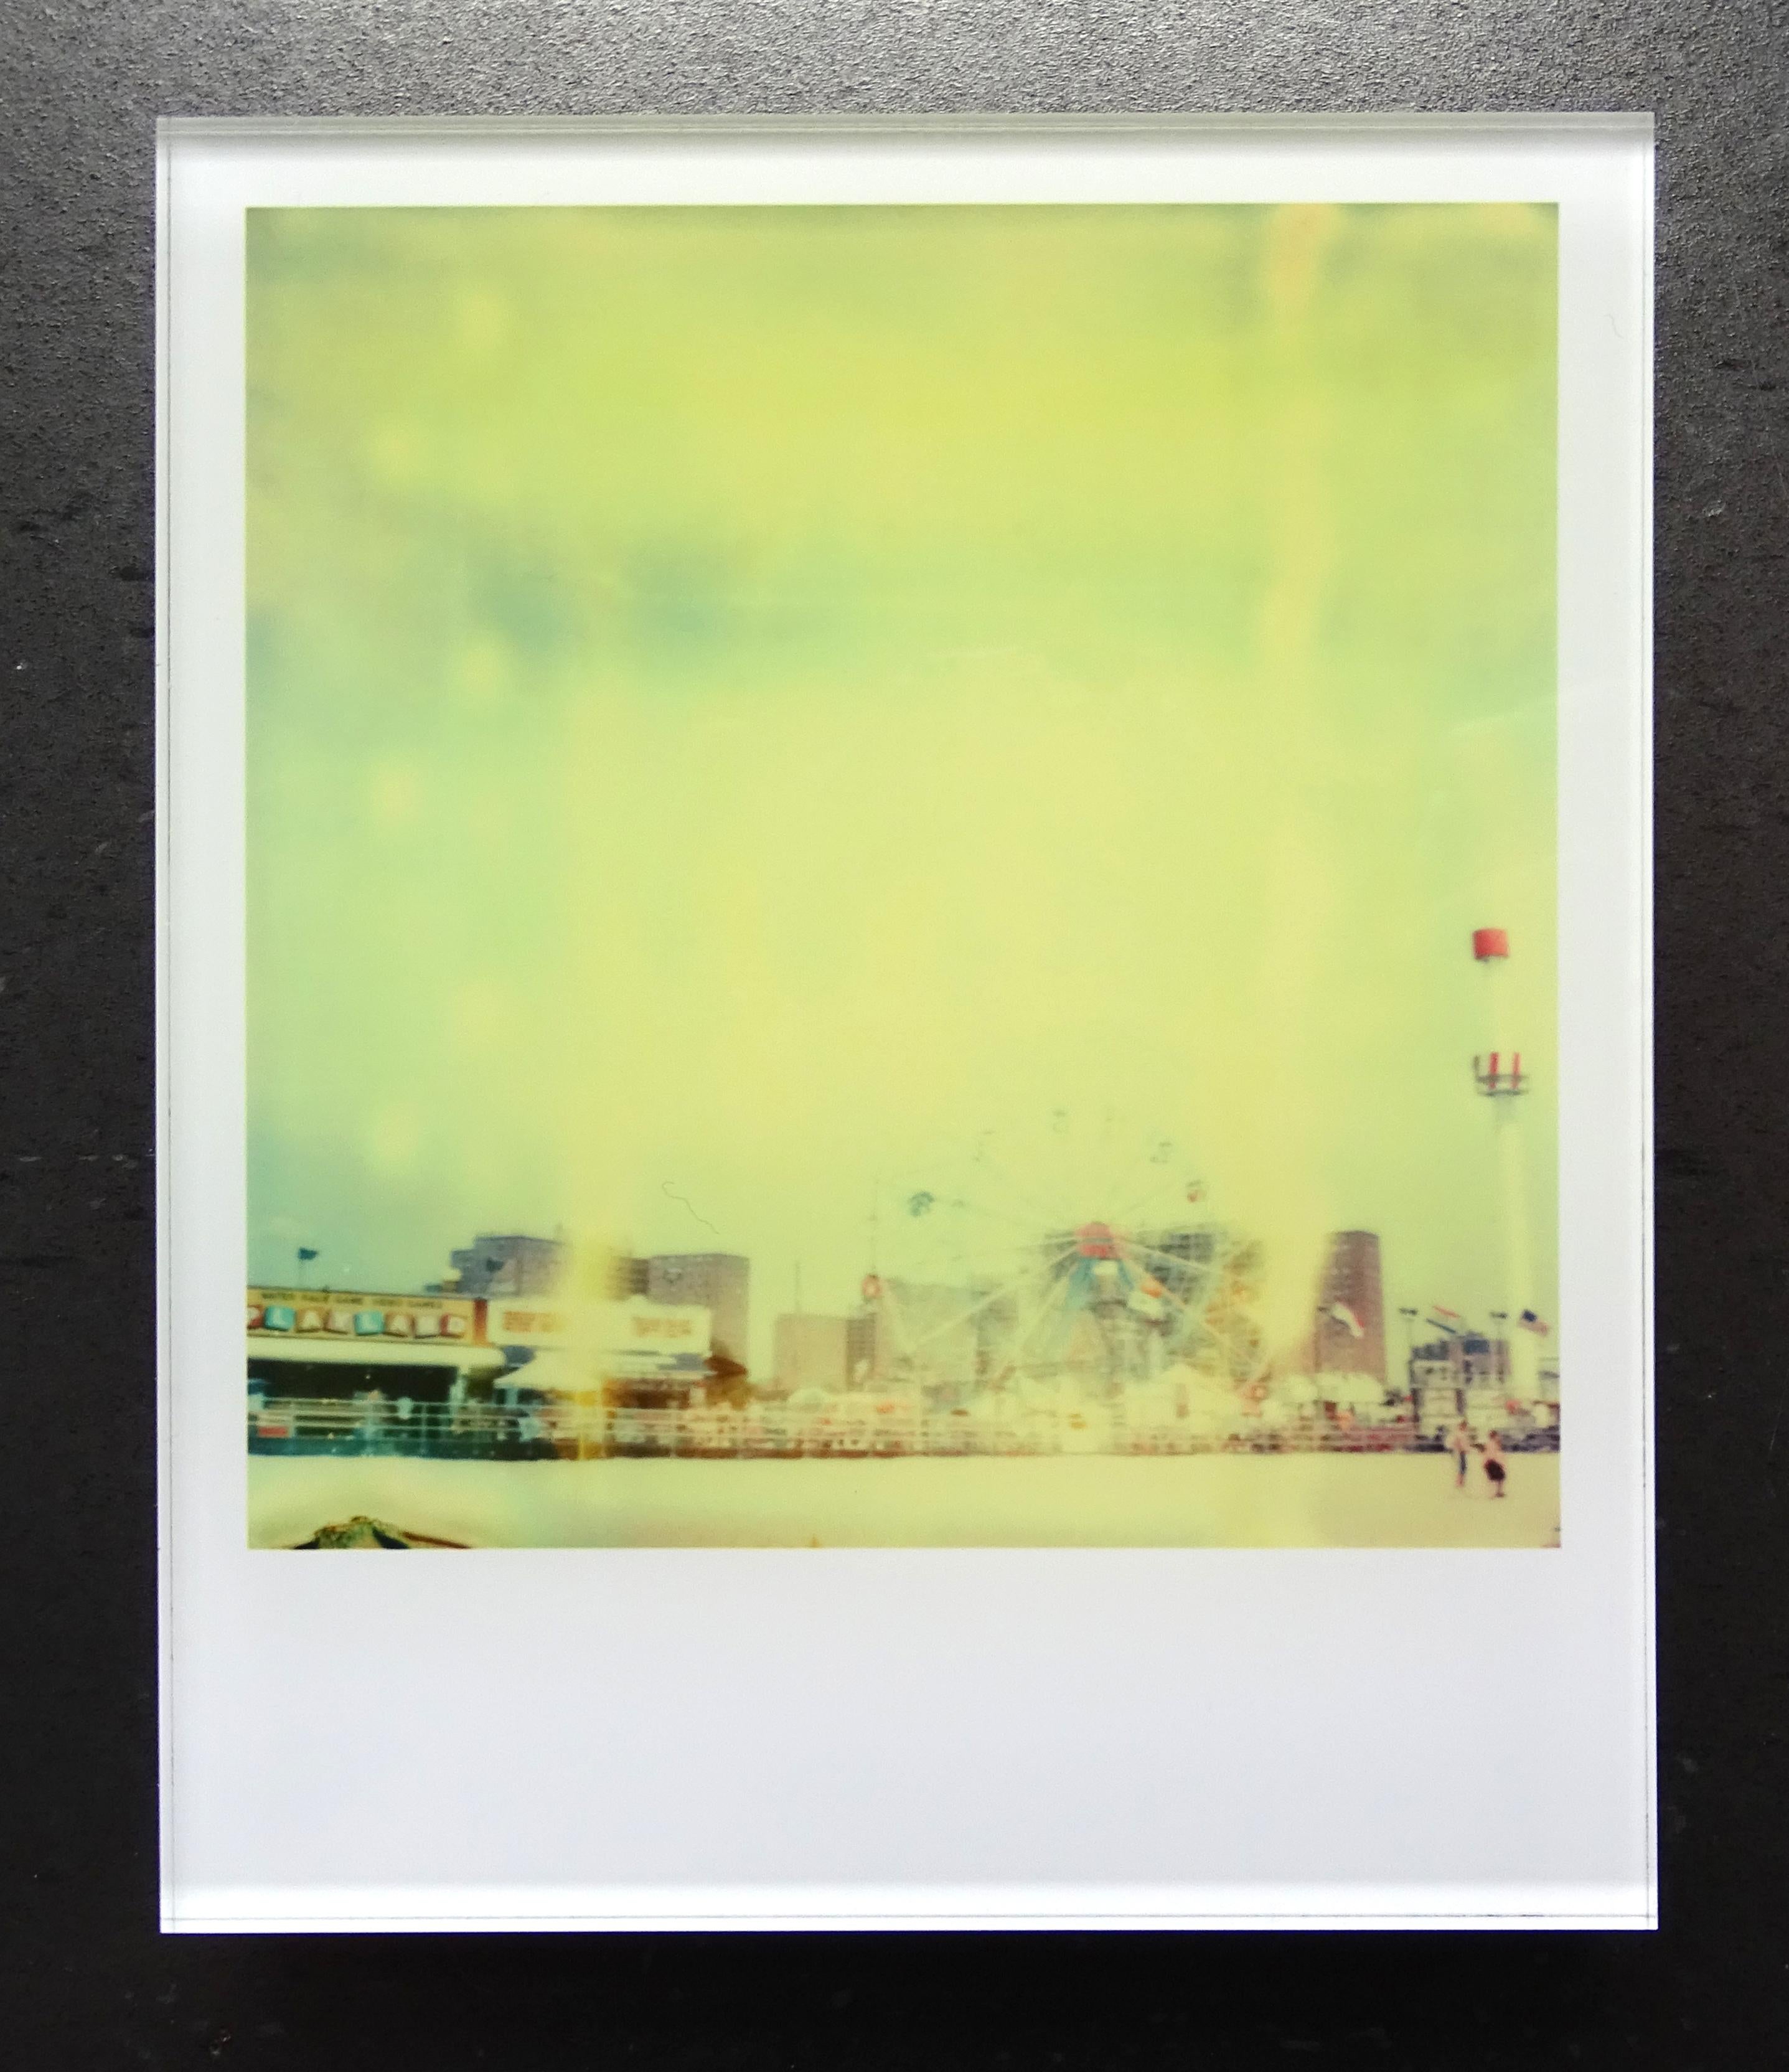 Stefanie Schneider's Minis
Coney Island (Stay), 2006

Signed and signature brand on verso.
Lambda digital Color Photographs based on the Polaroid.
Sandwiched in between Plexiglass (thickness 0.7cm)

from the movie 'Stay' by Marc Forster, featuring